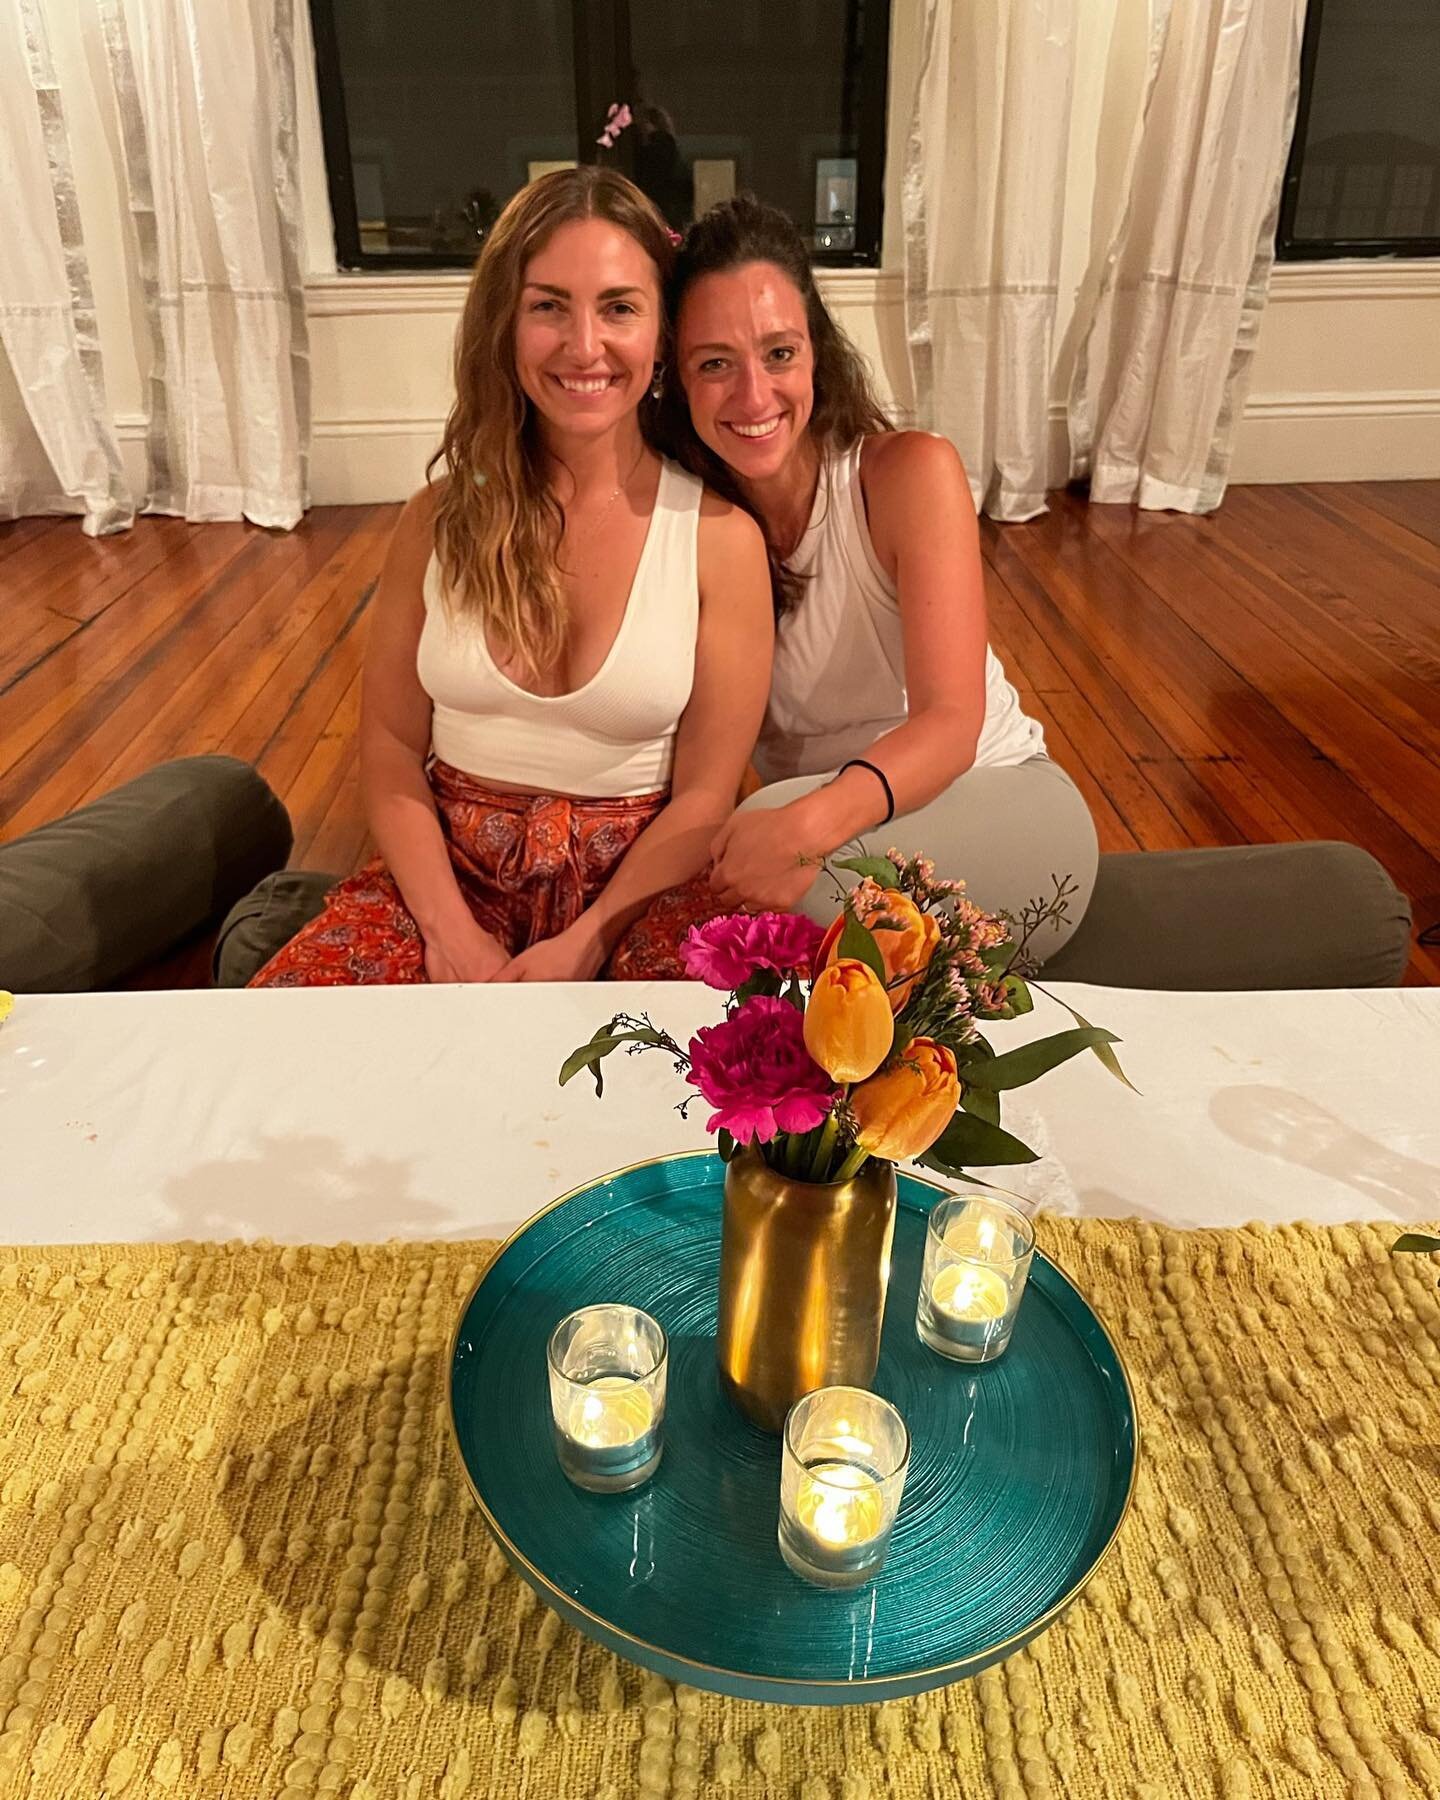 Created some magic last night ✨🪄 

@julianne_yoga and I set the scene at @somayogacenter for our first Nourish event last night and it&rsquo;s still sinking in how perfect the night was. We honored the summer season with energy, brightness, beauty a